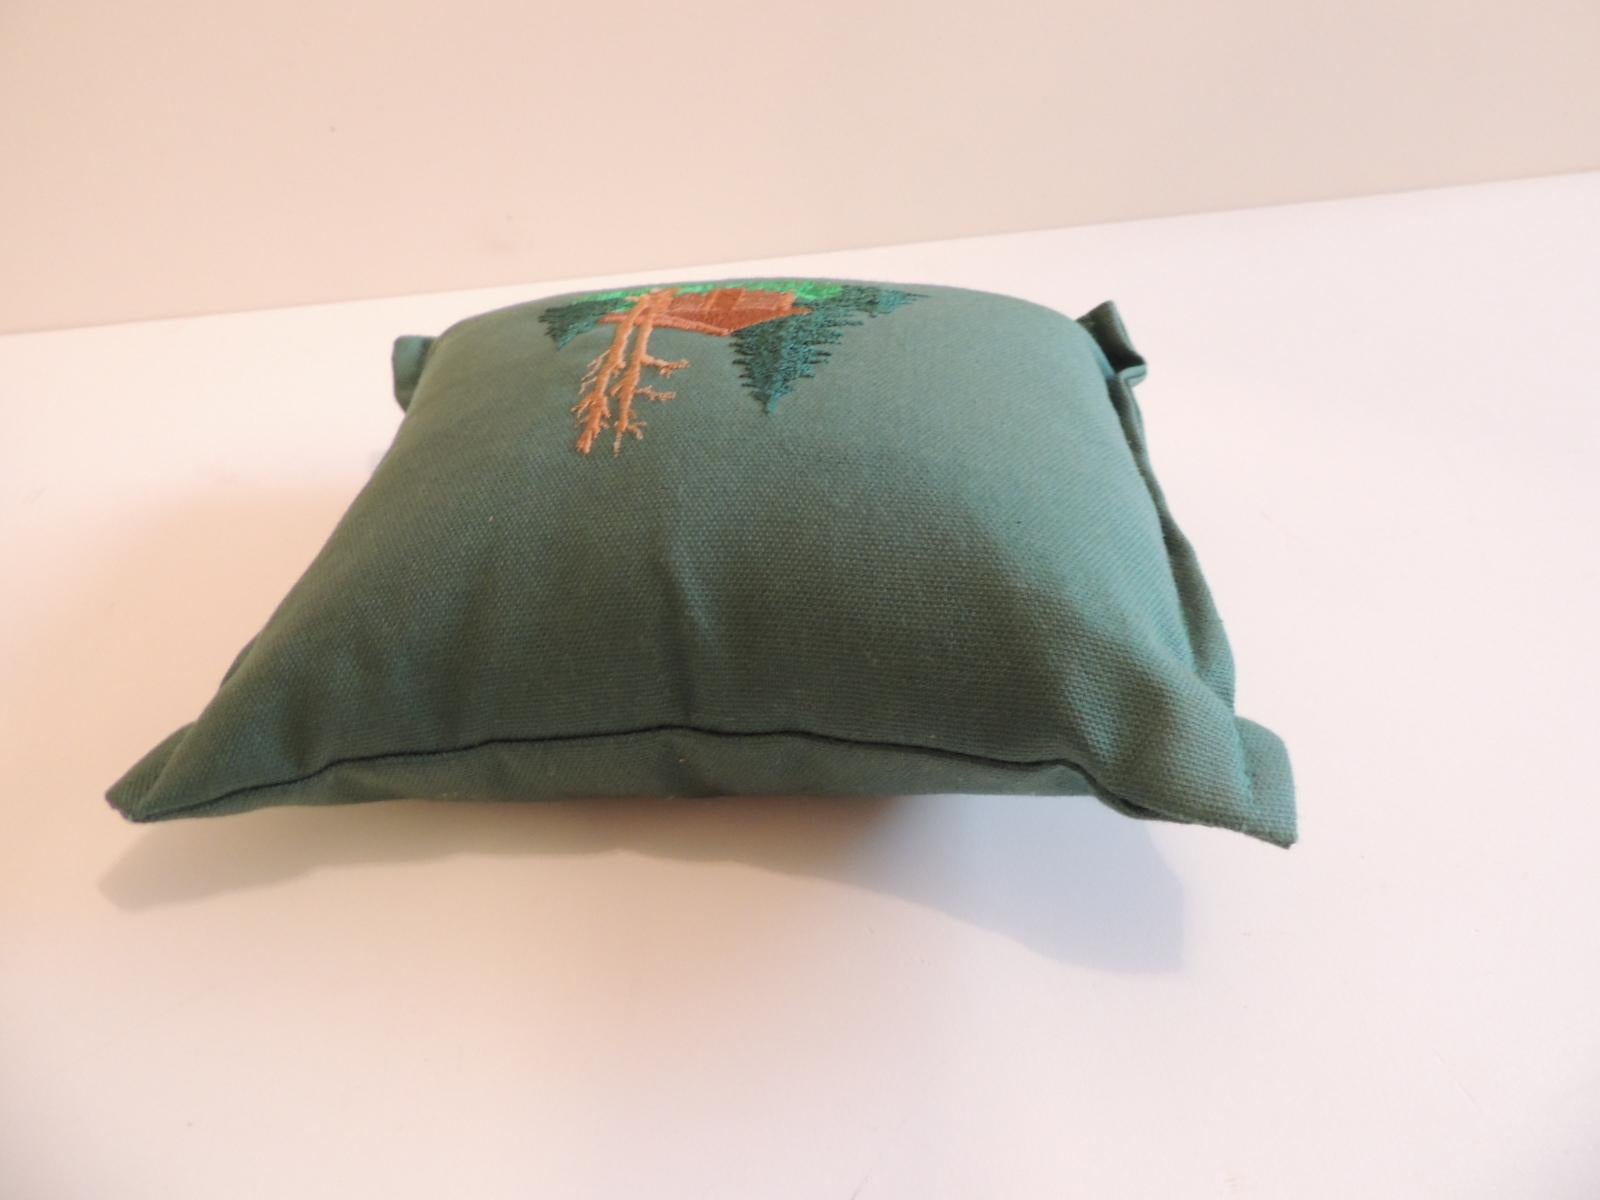 Small Balsam fir pine needles scented pillow
Hunter green embroidered front
Size: 7